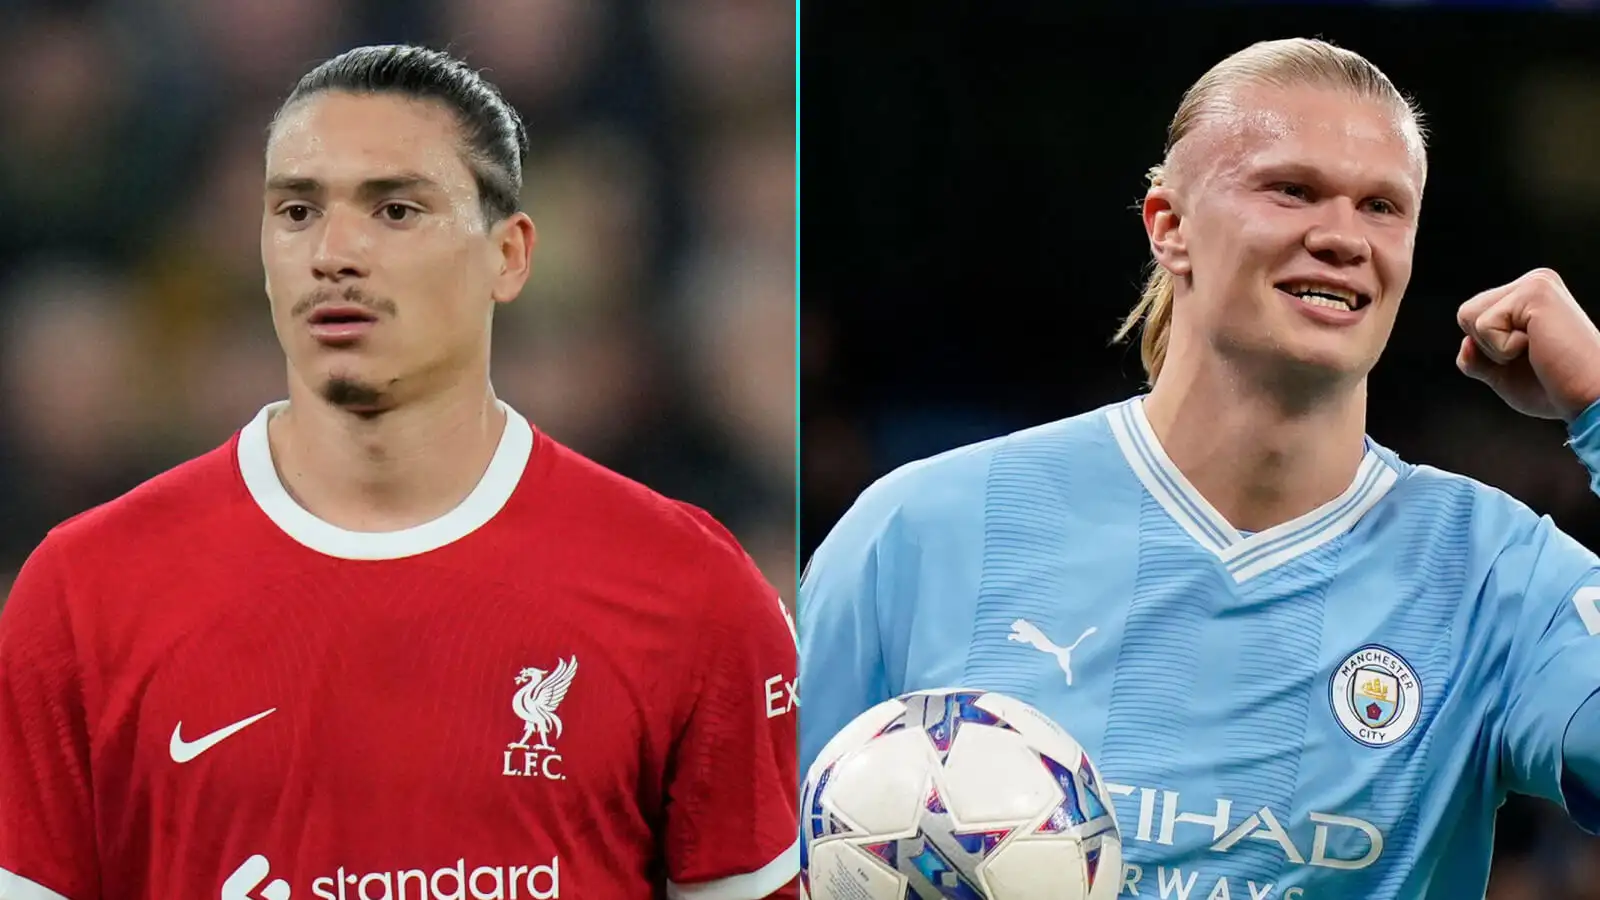 Liverpool would have the 'best player in the world' if he could finish like Man City star - Barnes